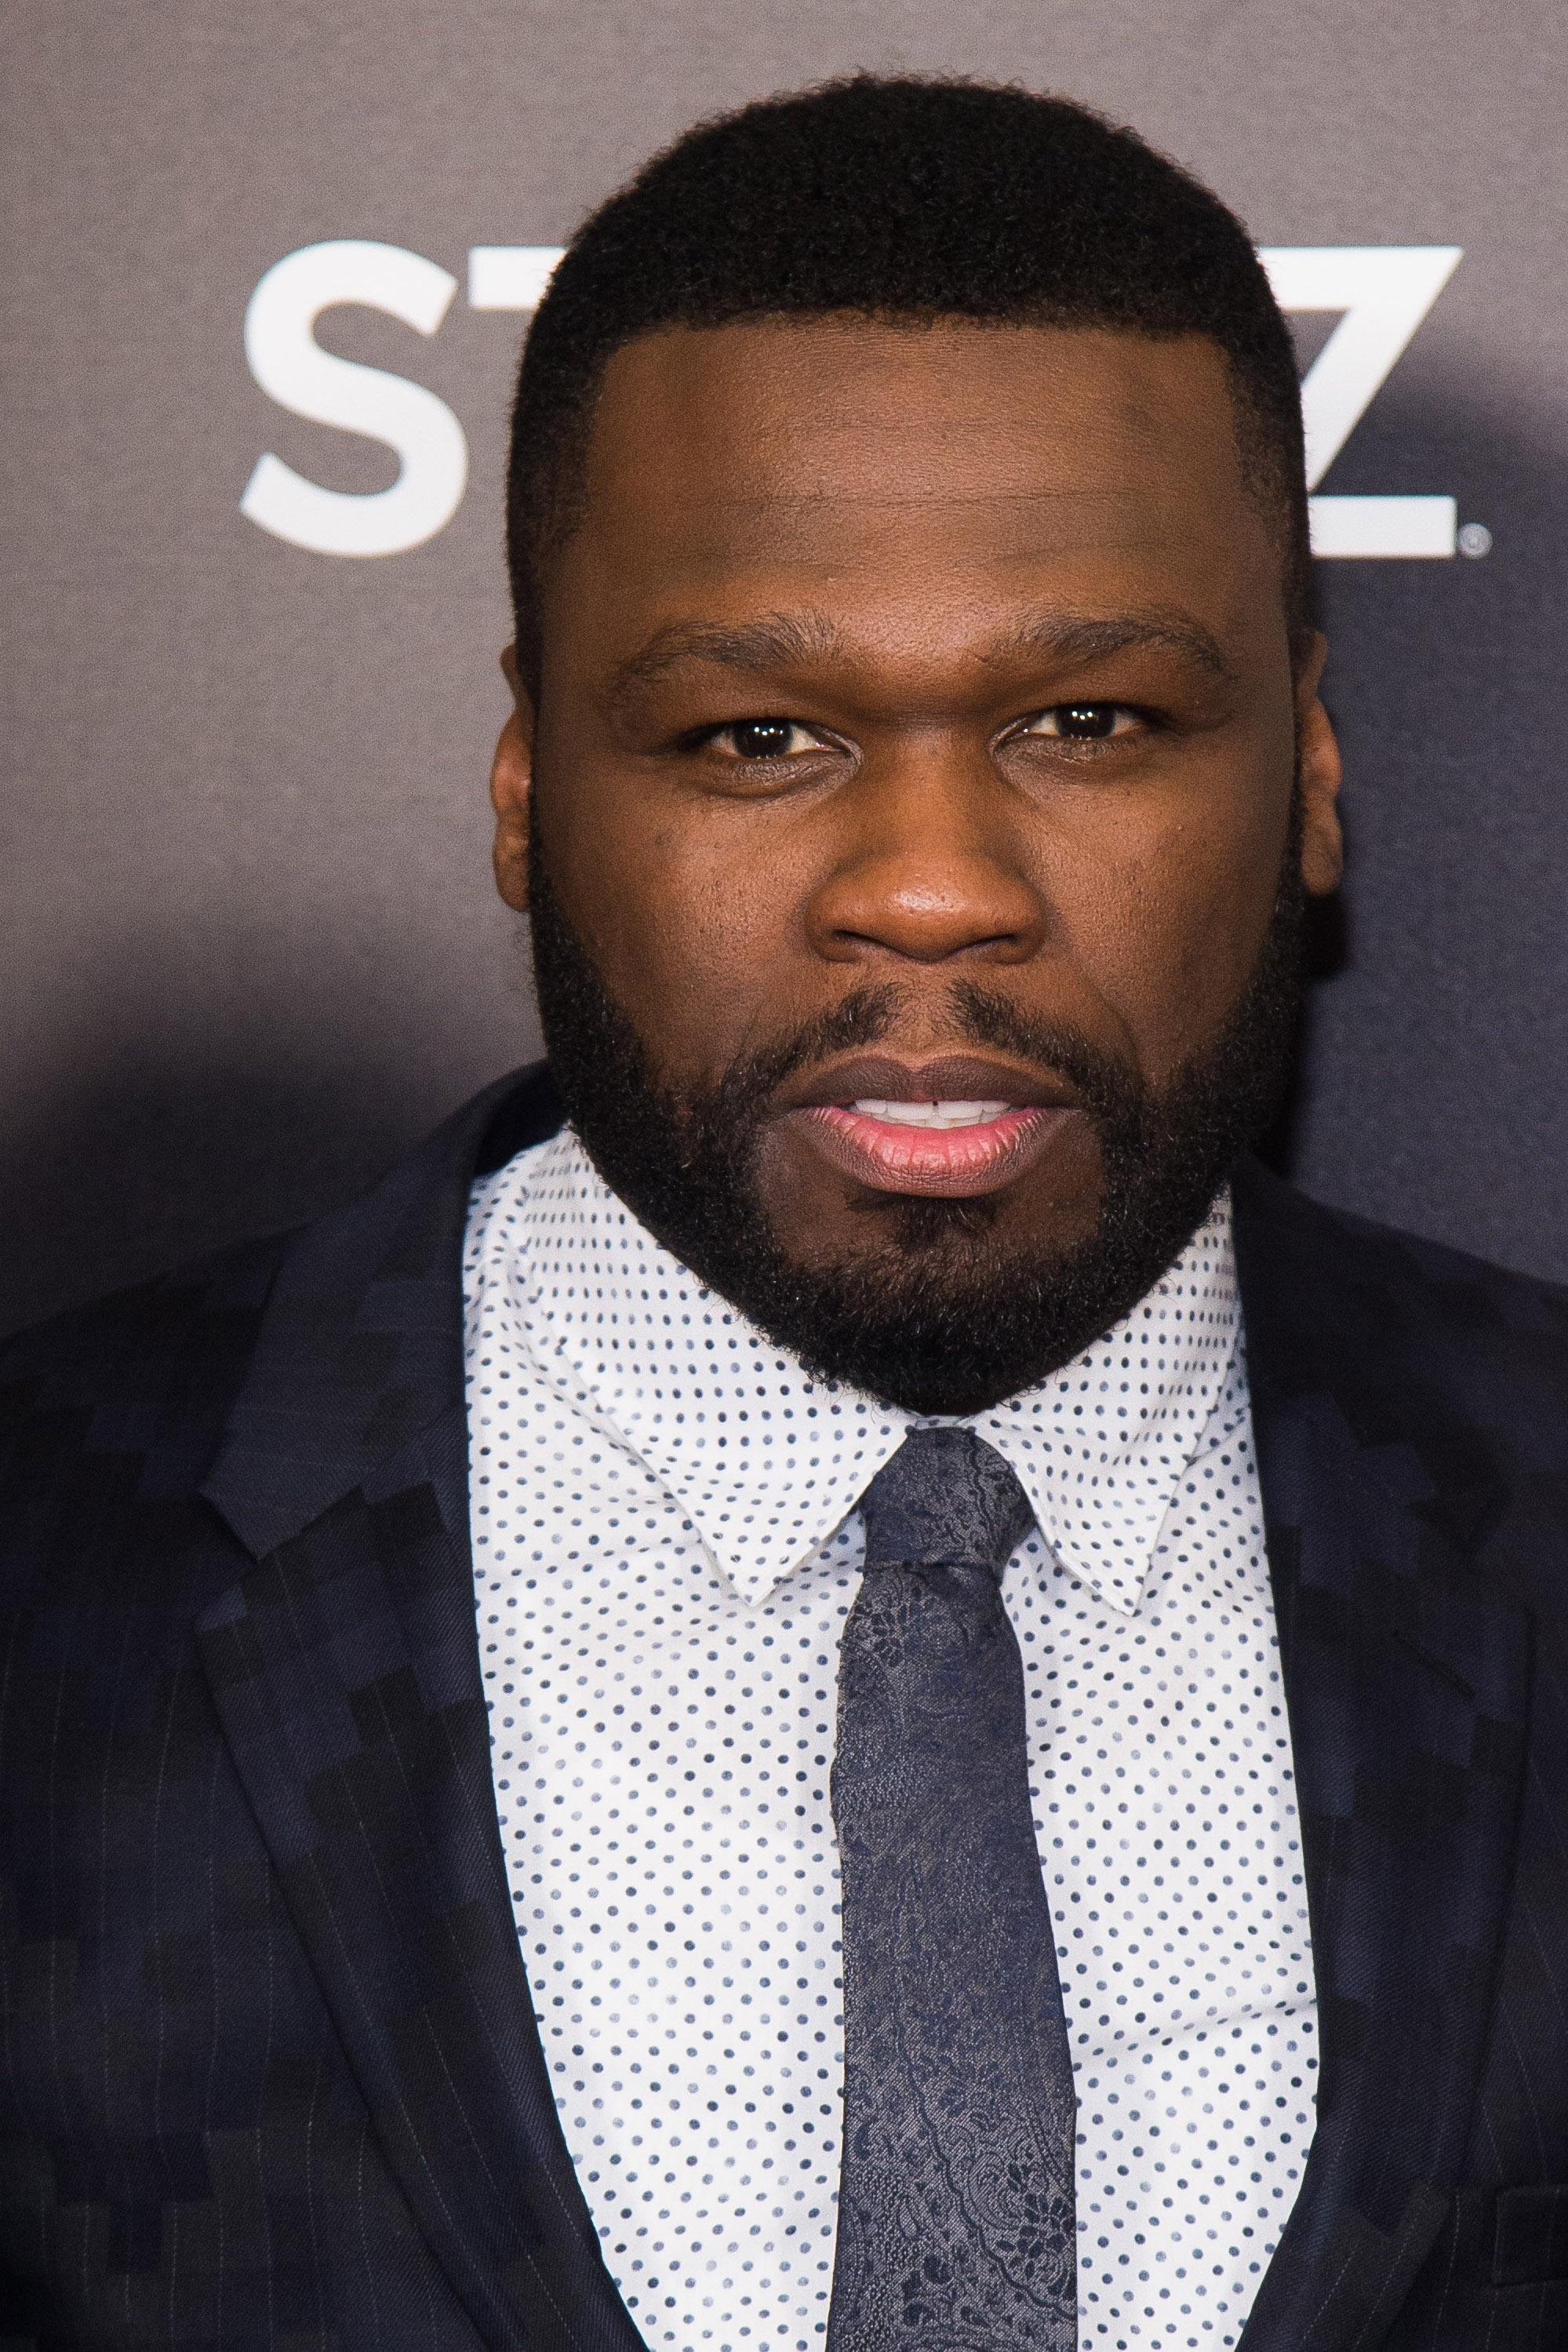 Rapper 50 Cent to Studio 5: 'Killing Police Officers is the Wrong Idea ...